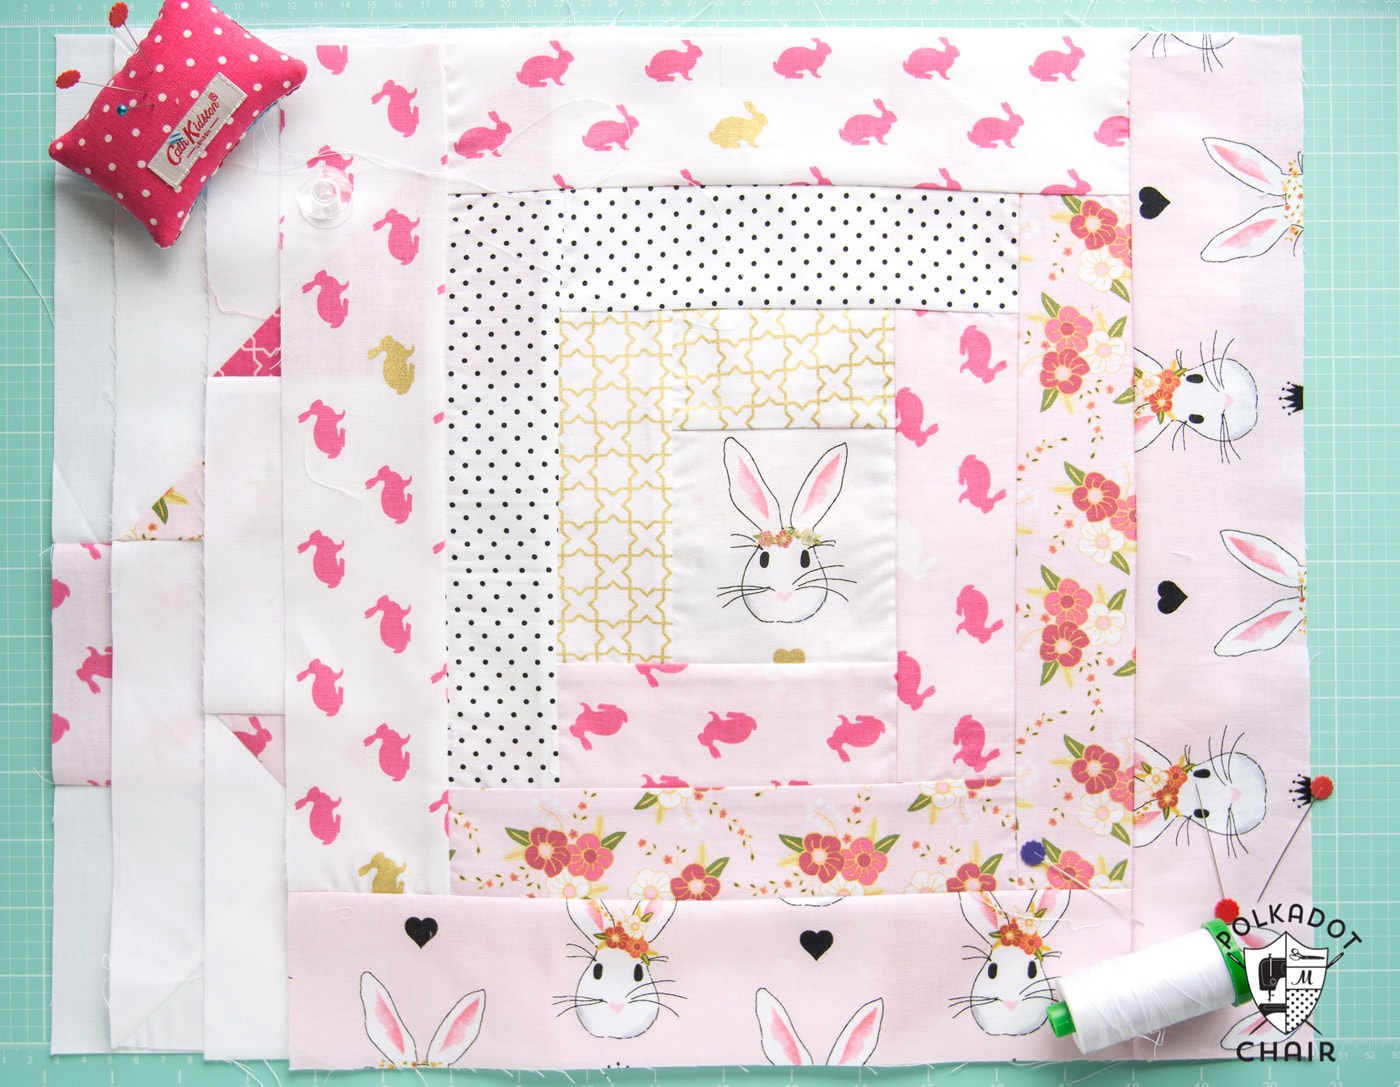 Free Quilt Tutorial and Pattern for a Log Cabin Quilt block; the April Block of the Month offered on the Polka Dot Chair Blog